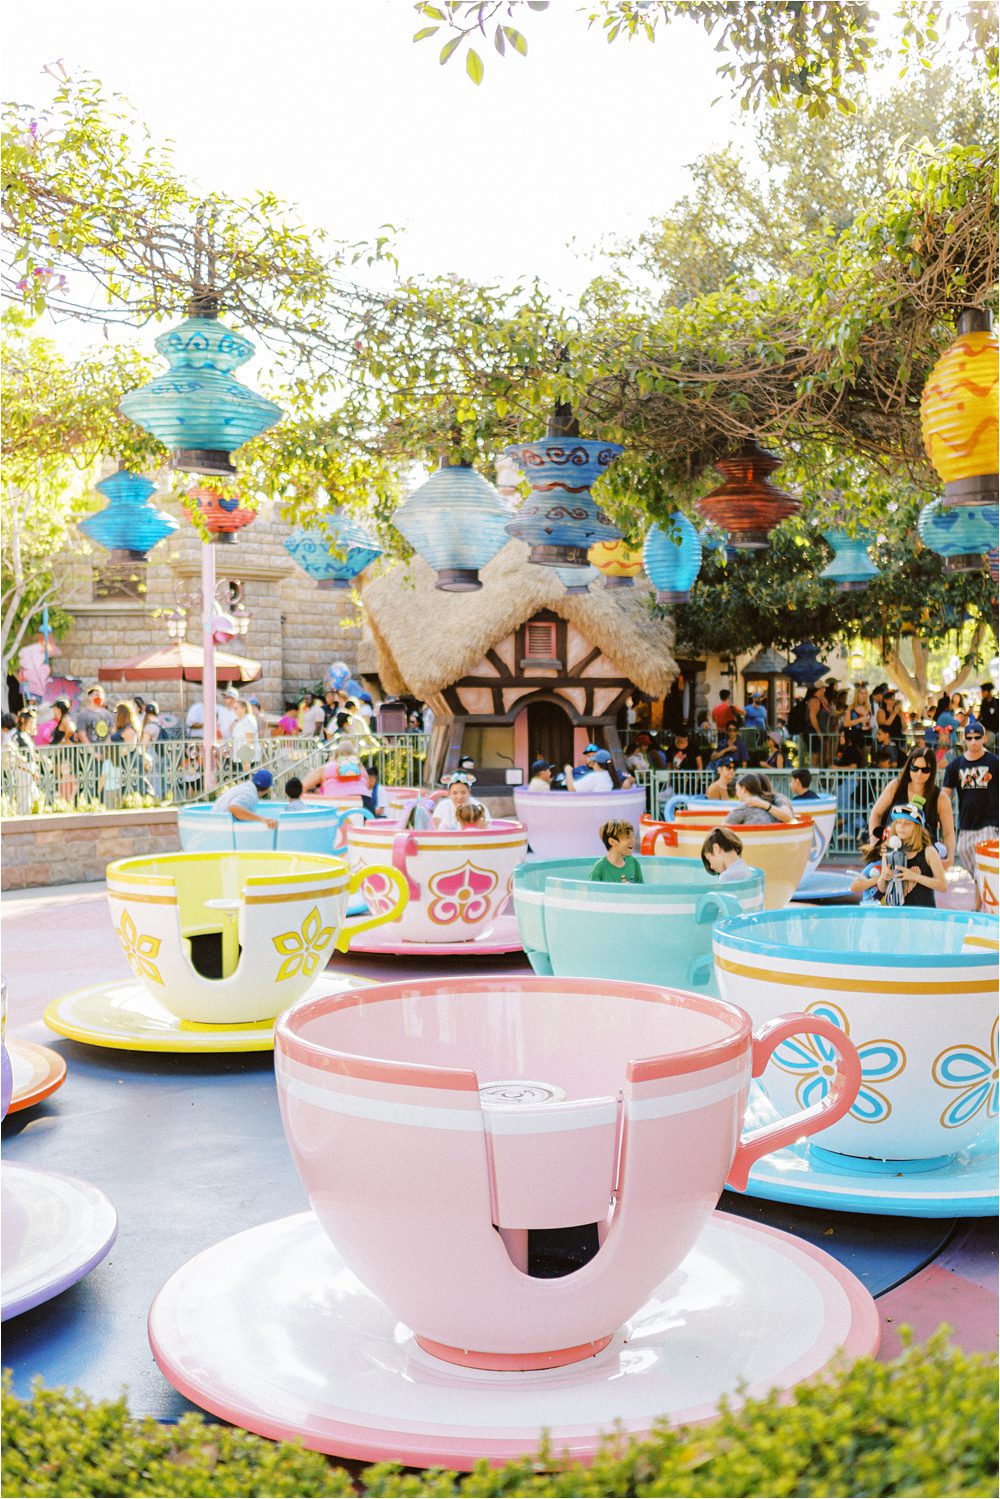 Photo of the colorful Tea Cups at Disneyland in California